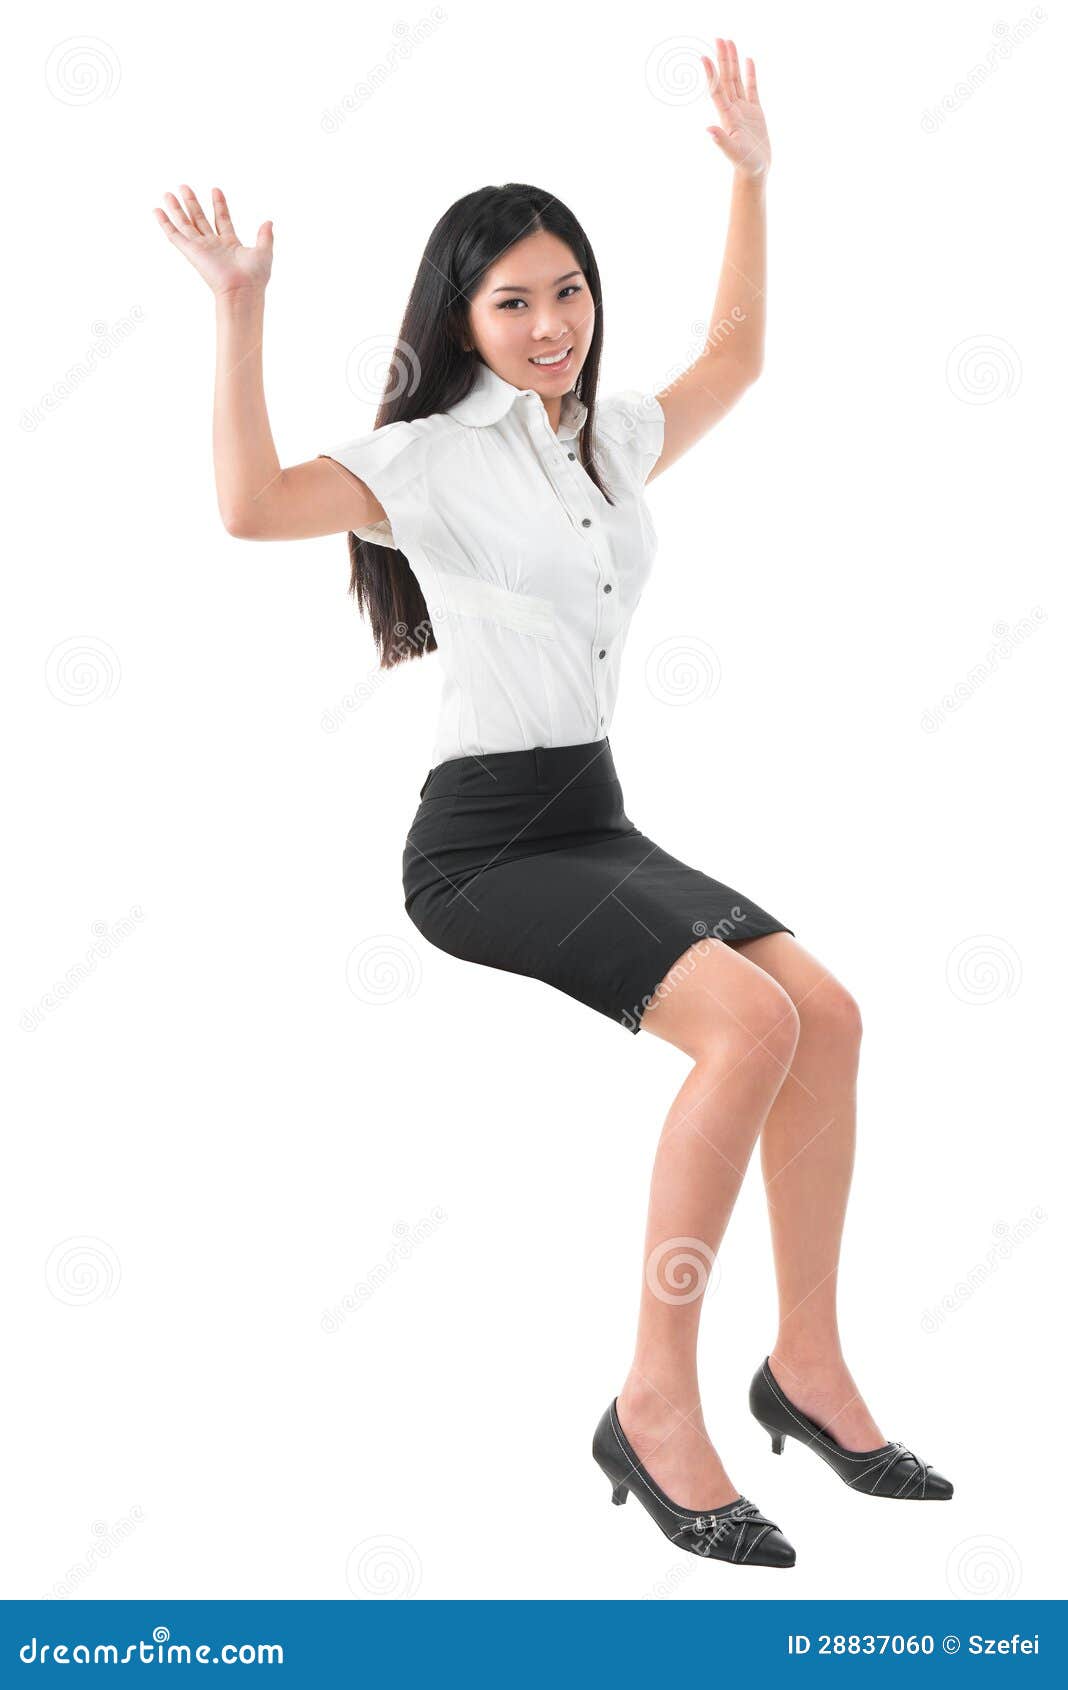 Full Body Arms Raised Young Asian Woman Stock Photo - Image: 28837060